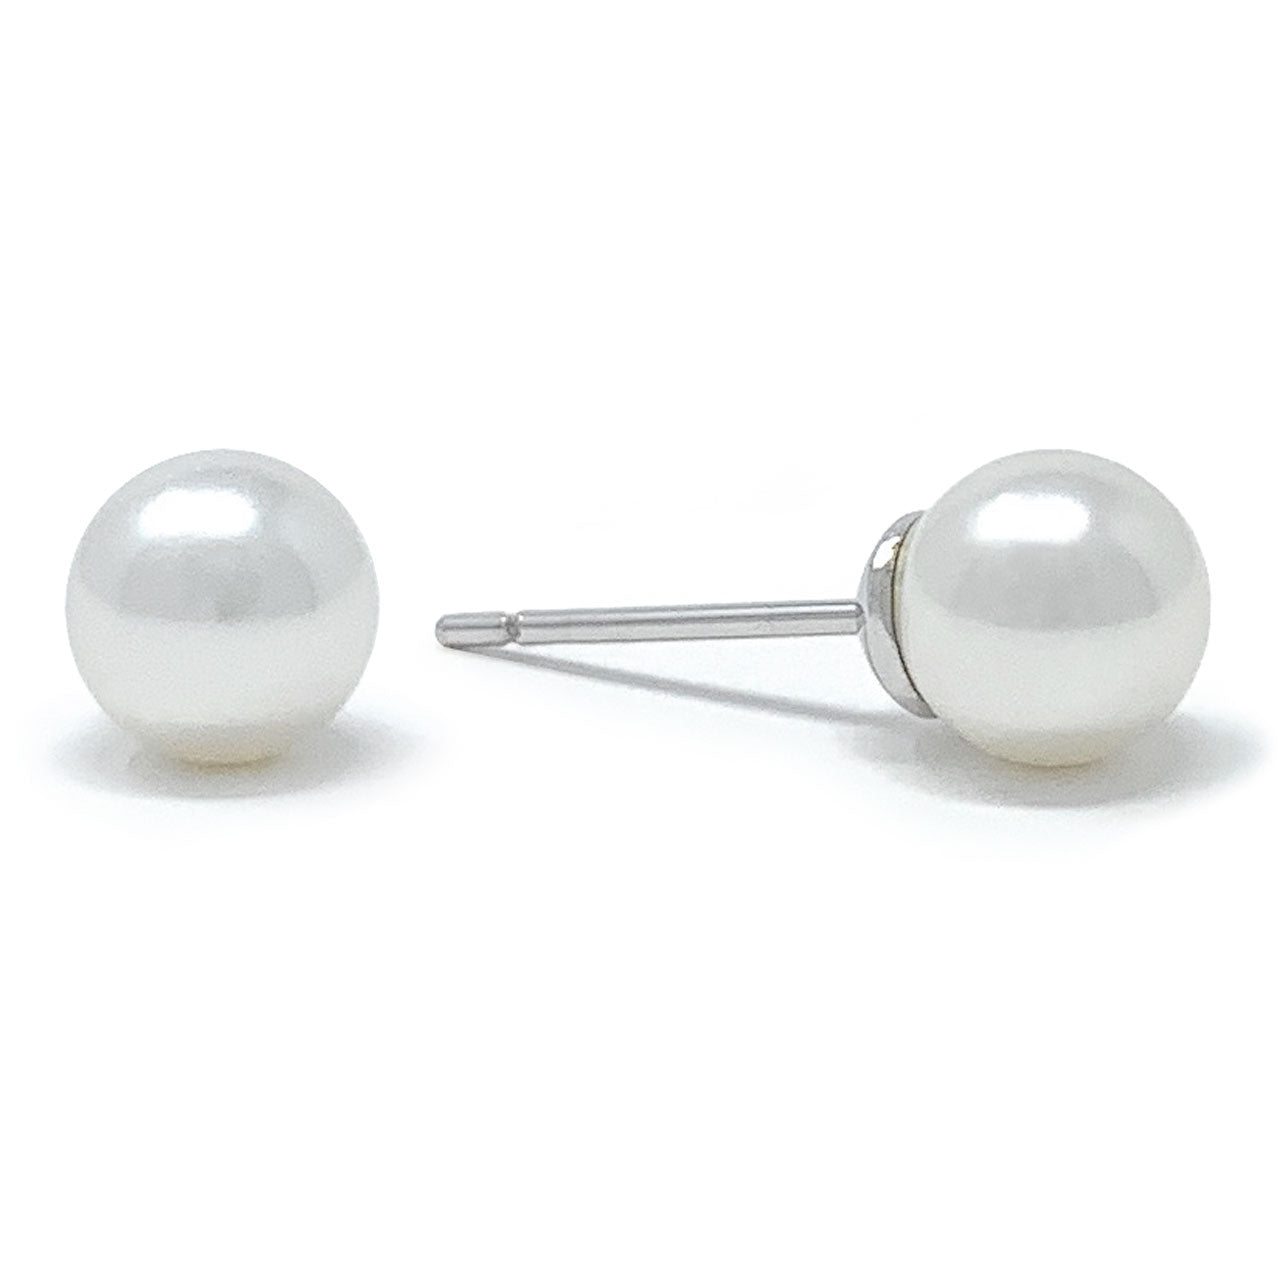 Elizabeth Small Stud Earrings with Ivory White Round Pearls from Swarovski Silver Toned Rhodium Plated - Ed Heart